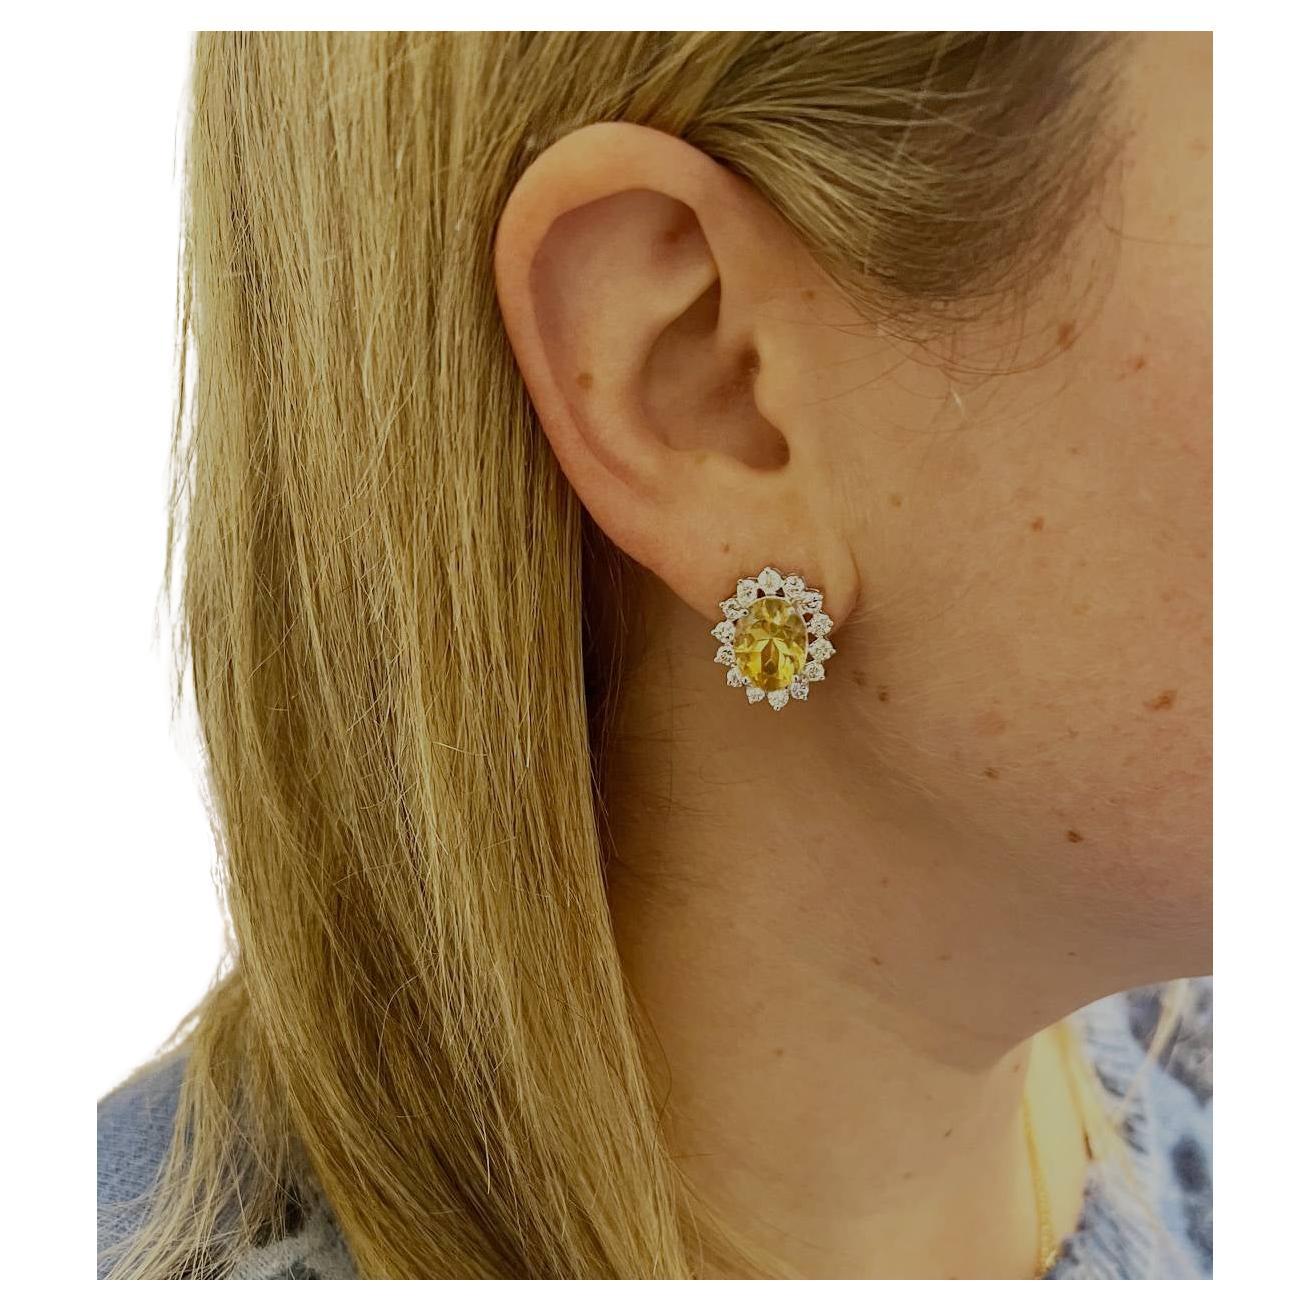 14 Karat White Gold Citrine & Natural Diamond Halo Earrings 
Metal: 14k white gold
Weight: 8.47 grams
Diamonds: Approx. 1.40 CTW G-H SI round natural diamonds
Citrine: 9 x 11mm
Dimensions: 18 x 15.5mm
Backs: Lever backs with posts
